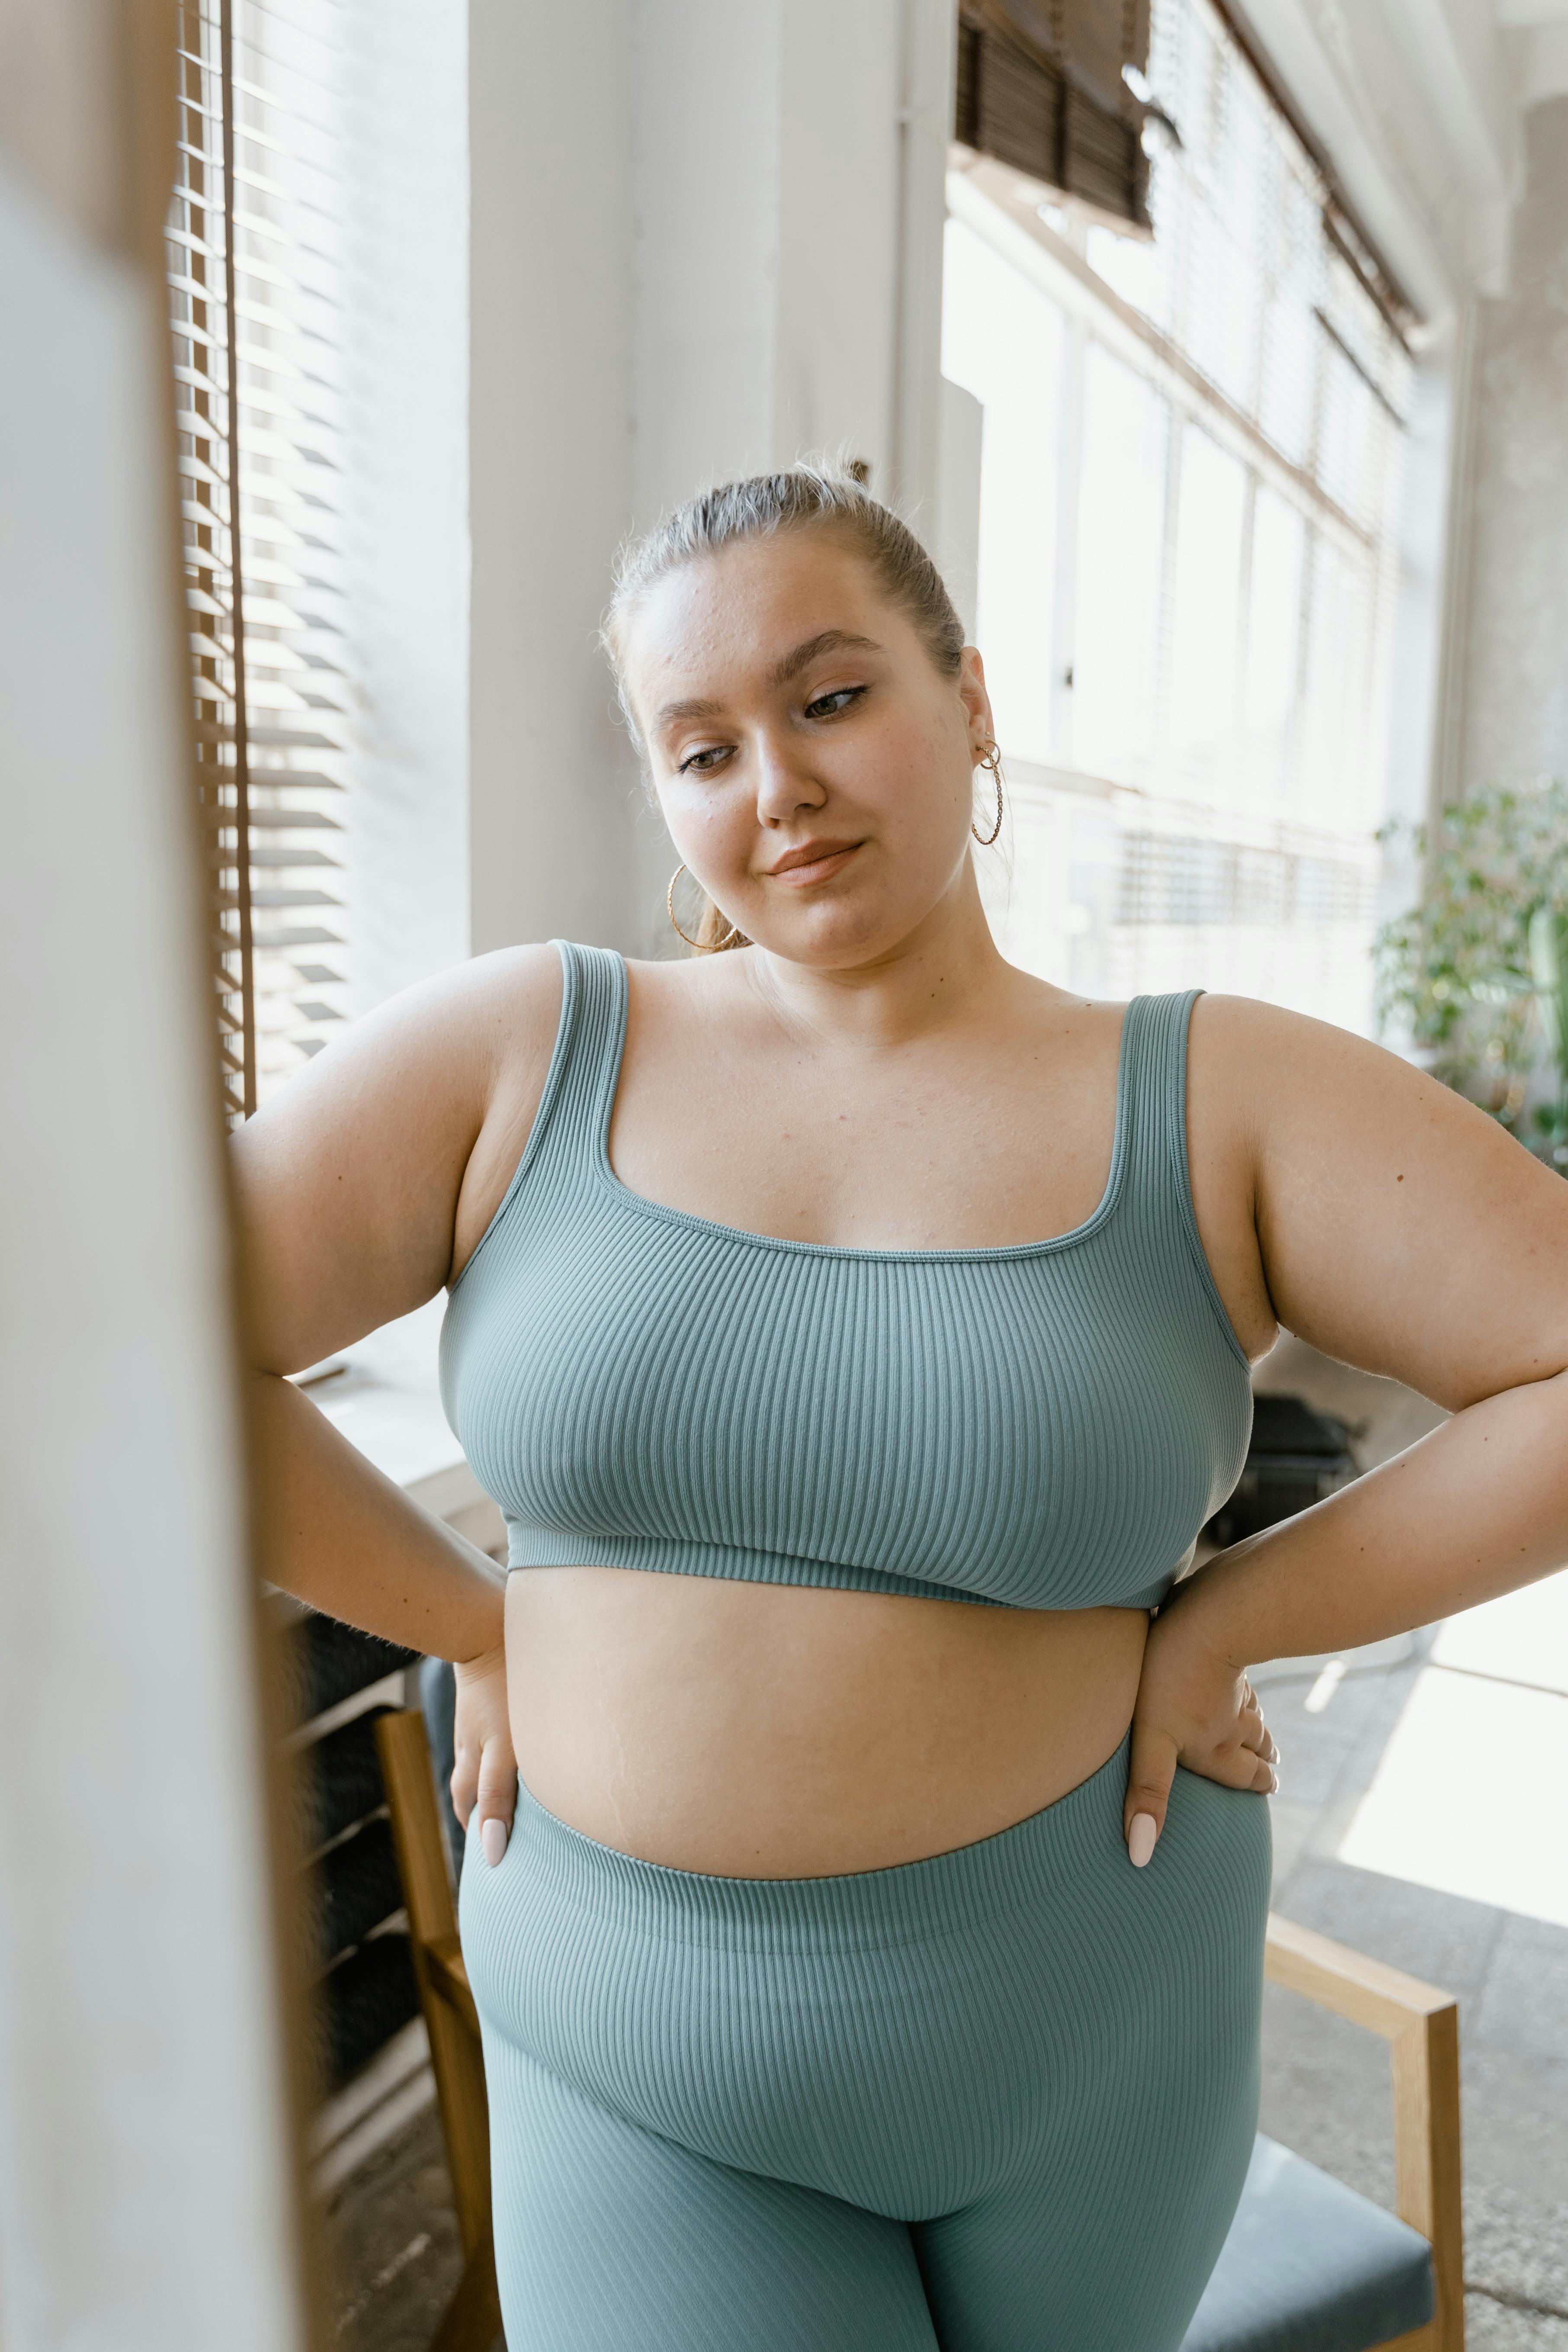 Woman in Teal Sports Bra and Brown Leggings · Free Stock Photo